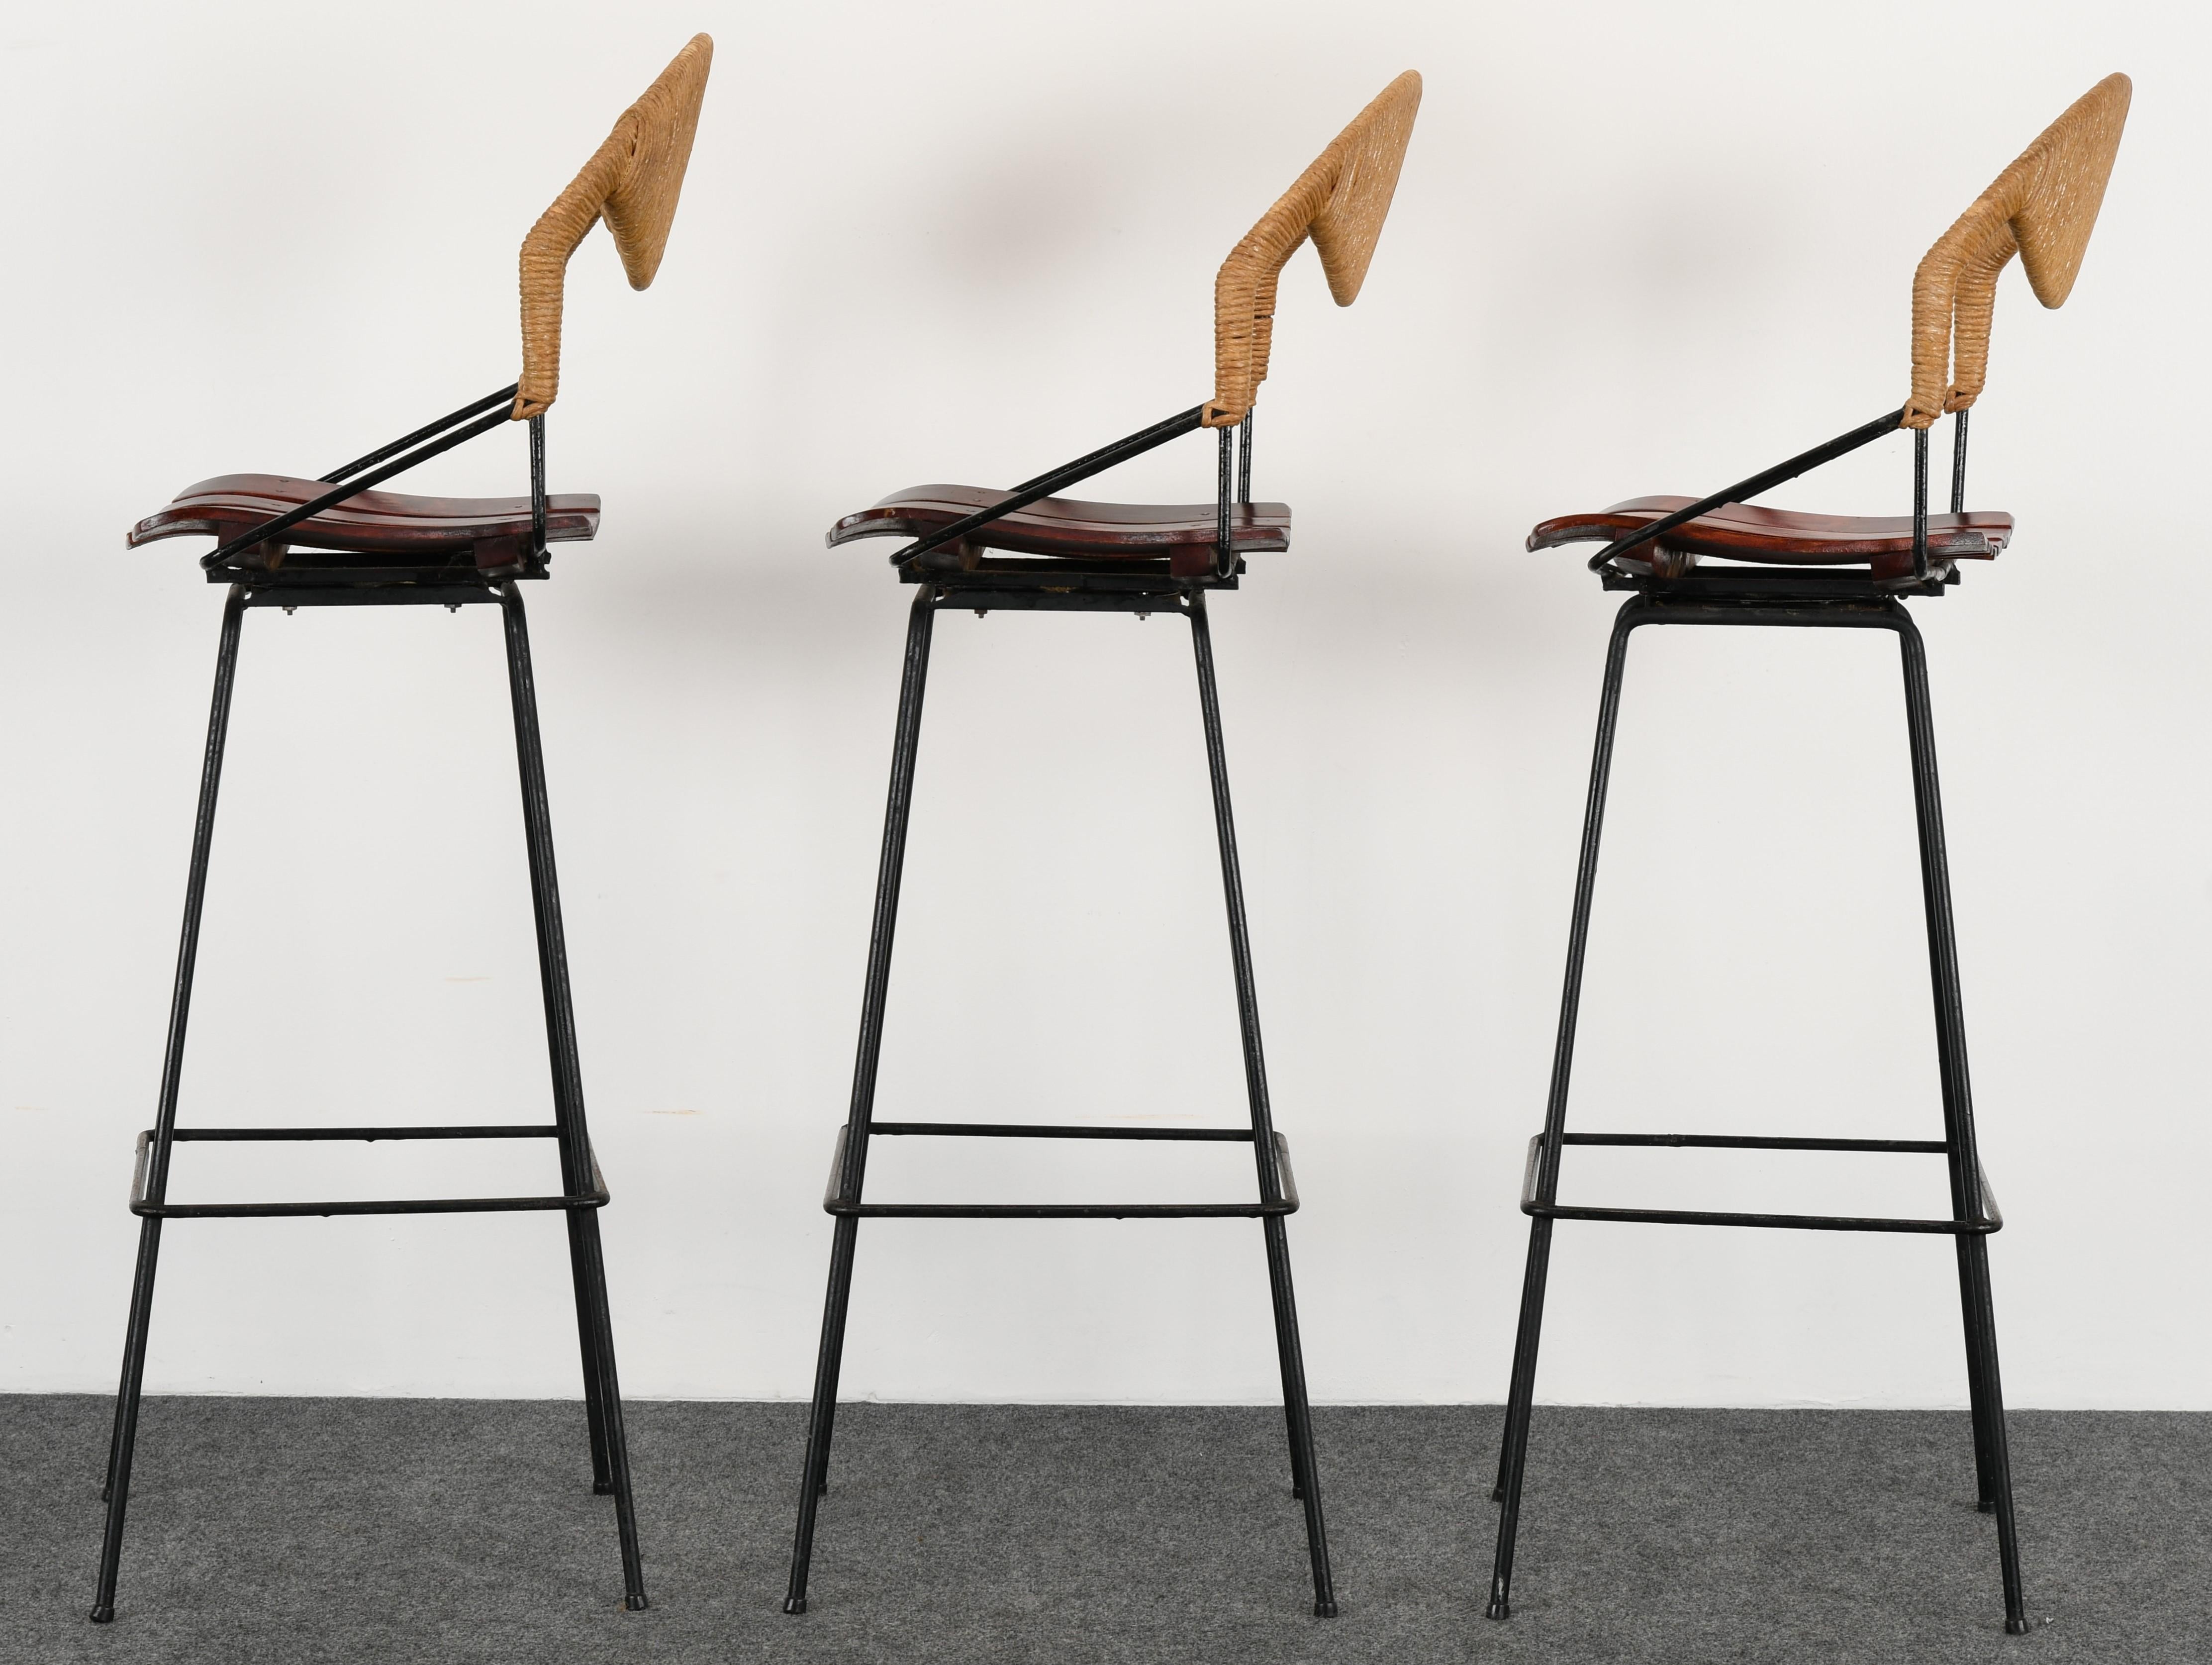 A set of three swivel bar stools by Arthur Umanoff, 1960s. The stools have wood slat and rushed back seats with black metal iron base. Stools are in good condition with minor scratches to rush but not distracting.

Dimensions: 45.5